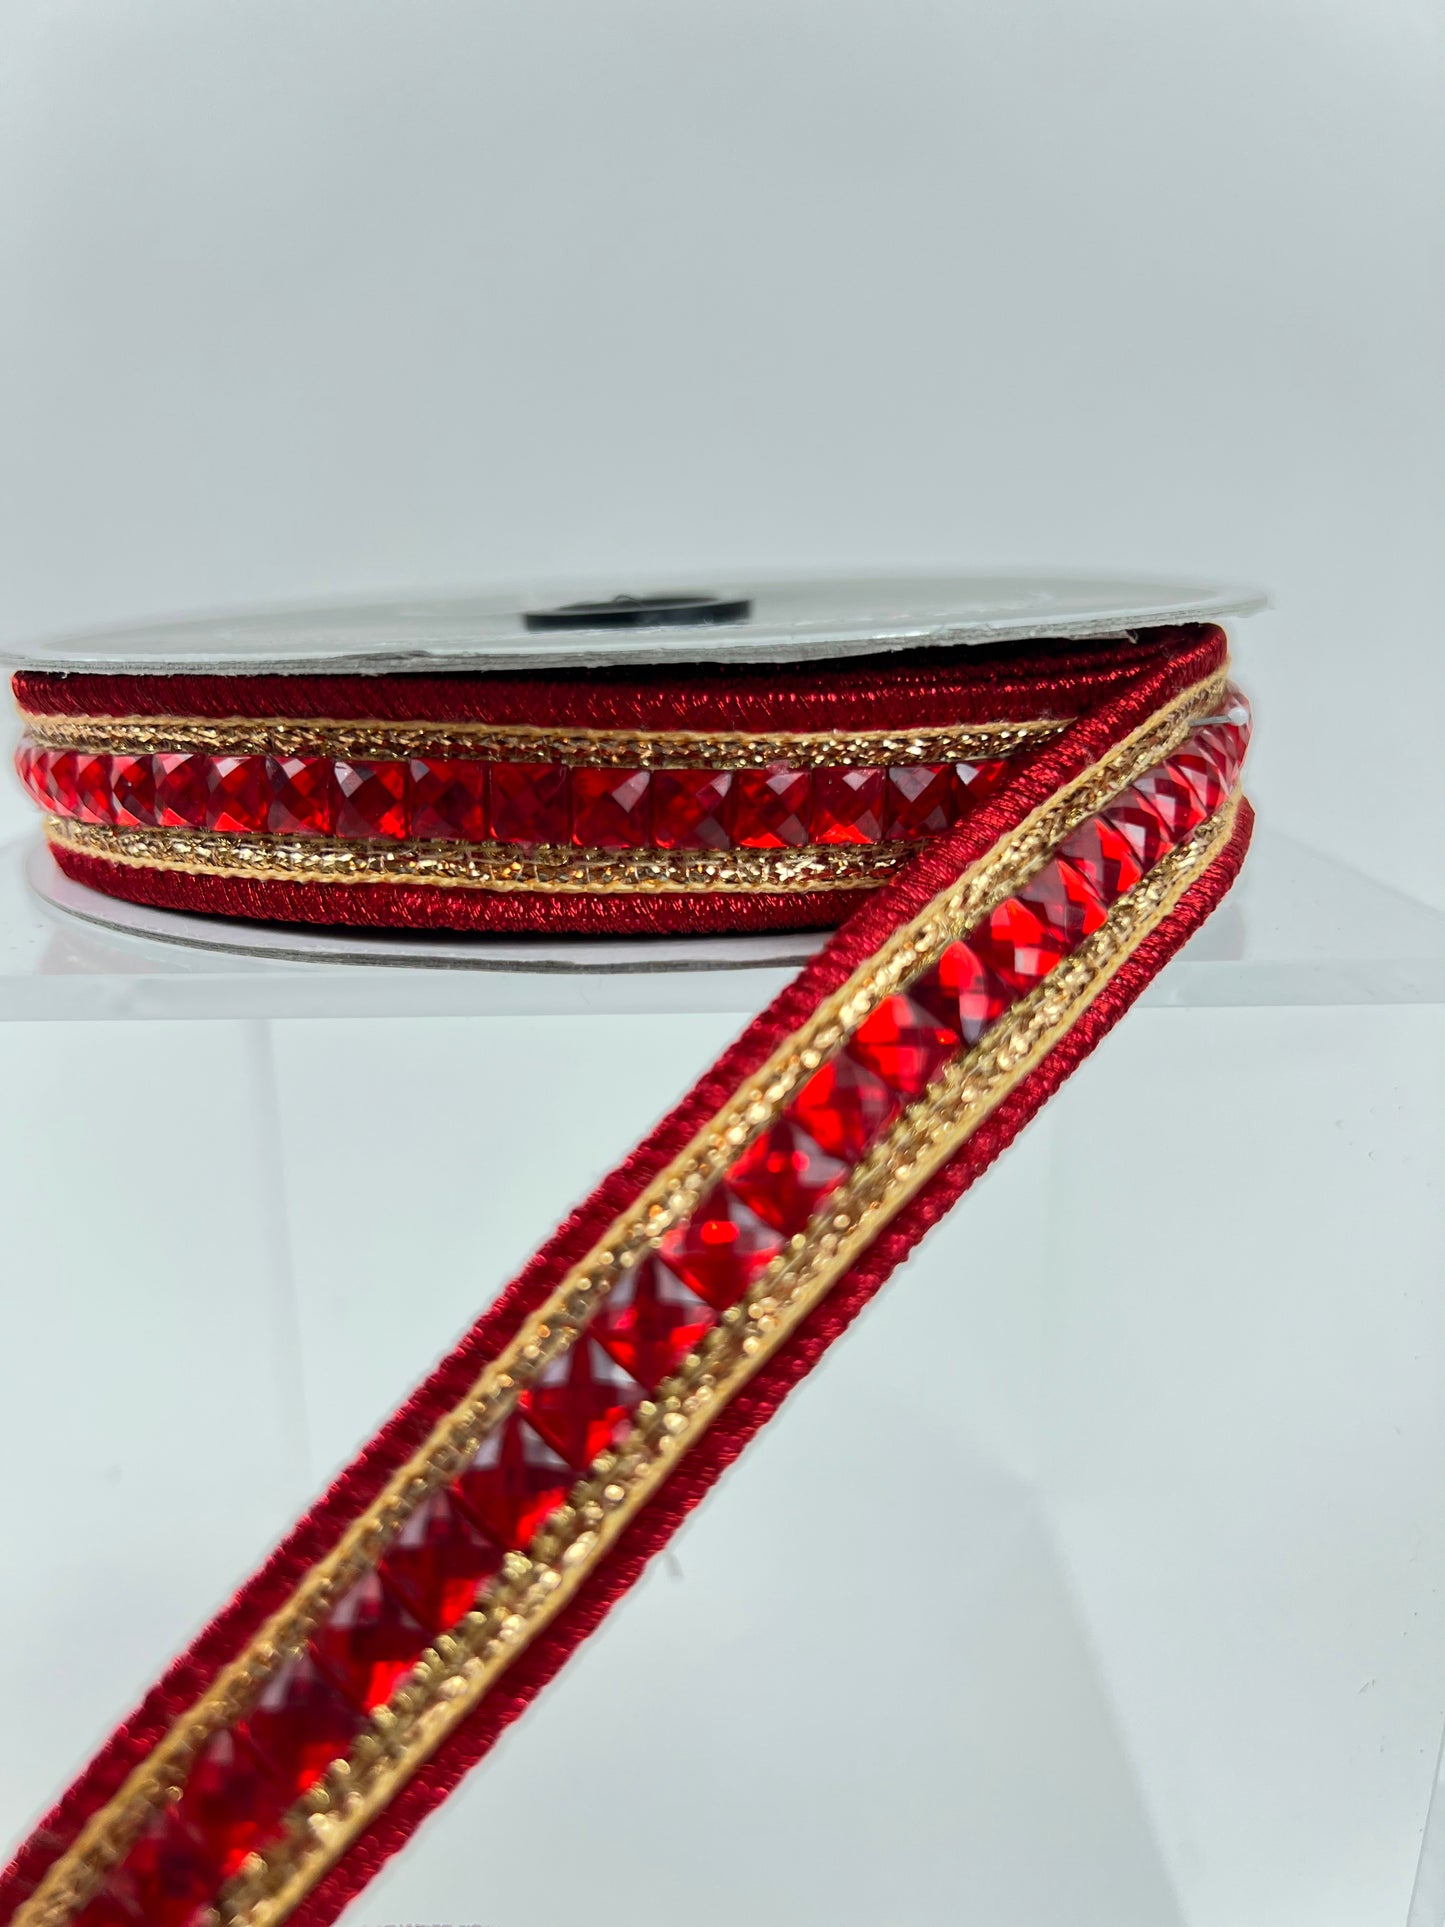 .75"X5YD JEWELY GARLAND RED